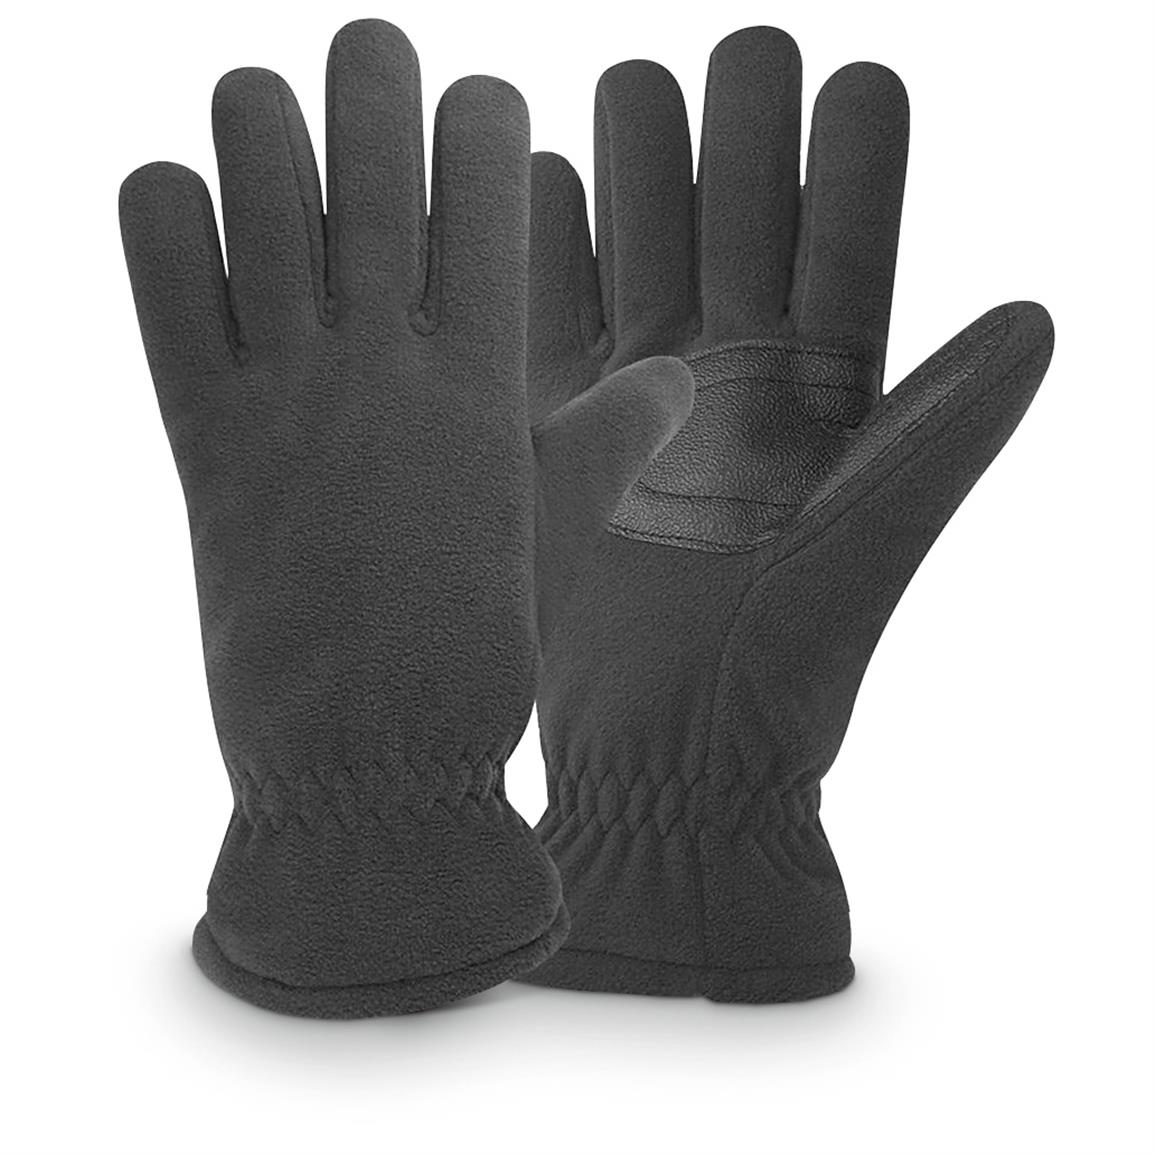 Igloos Men's Waterproof Insulated Fleece Gloves, 2 Pairs, Anthracite